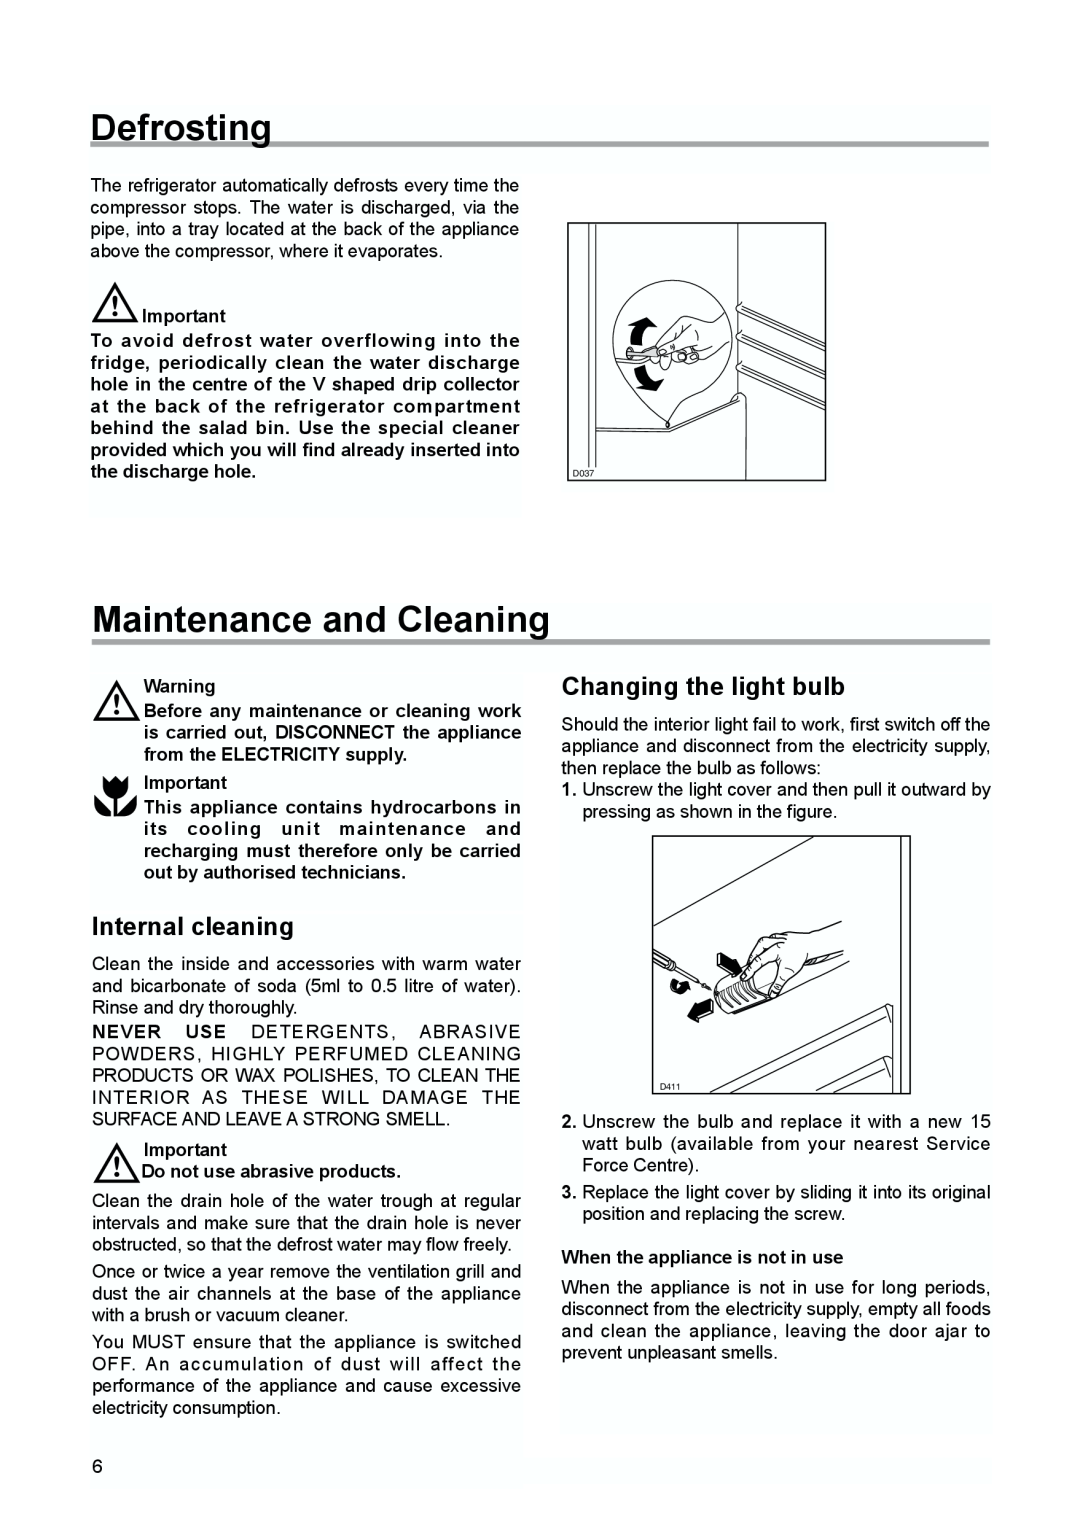 Zanussi ZBA 6160, ZBA 6230 manual Defrosting, Maintenance and Cleaning, Internal cleaning, Changing the light bulb 